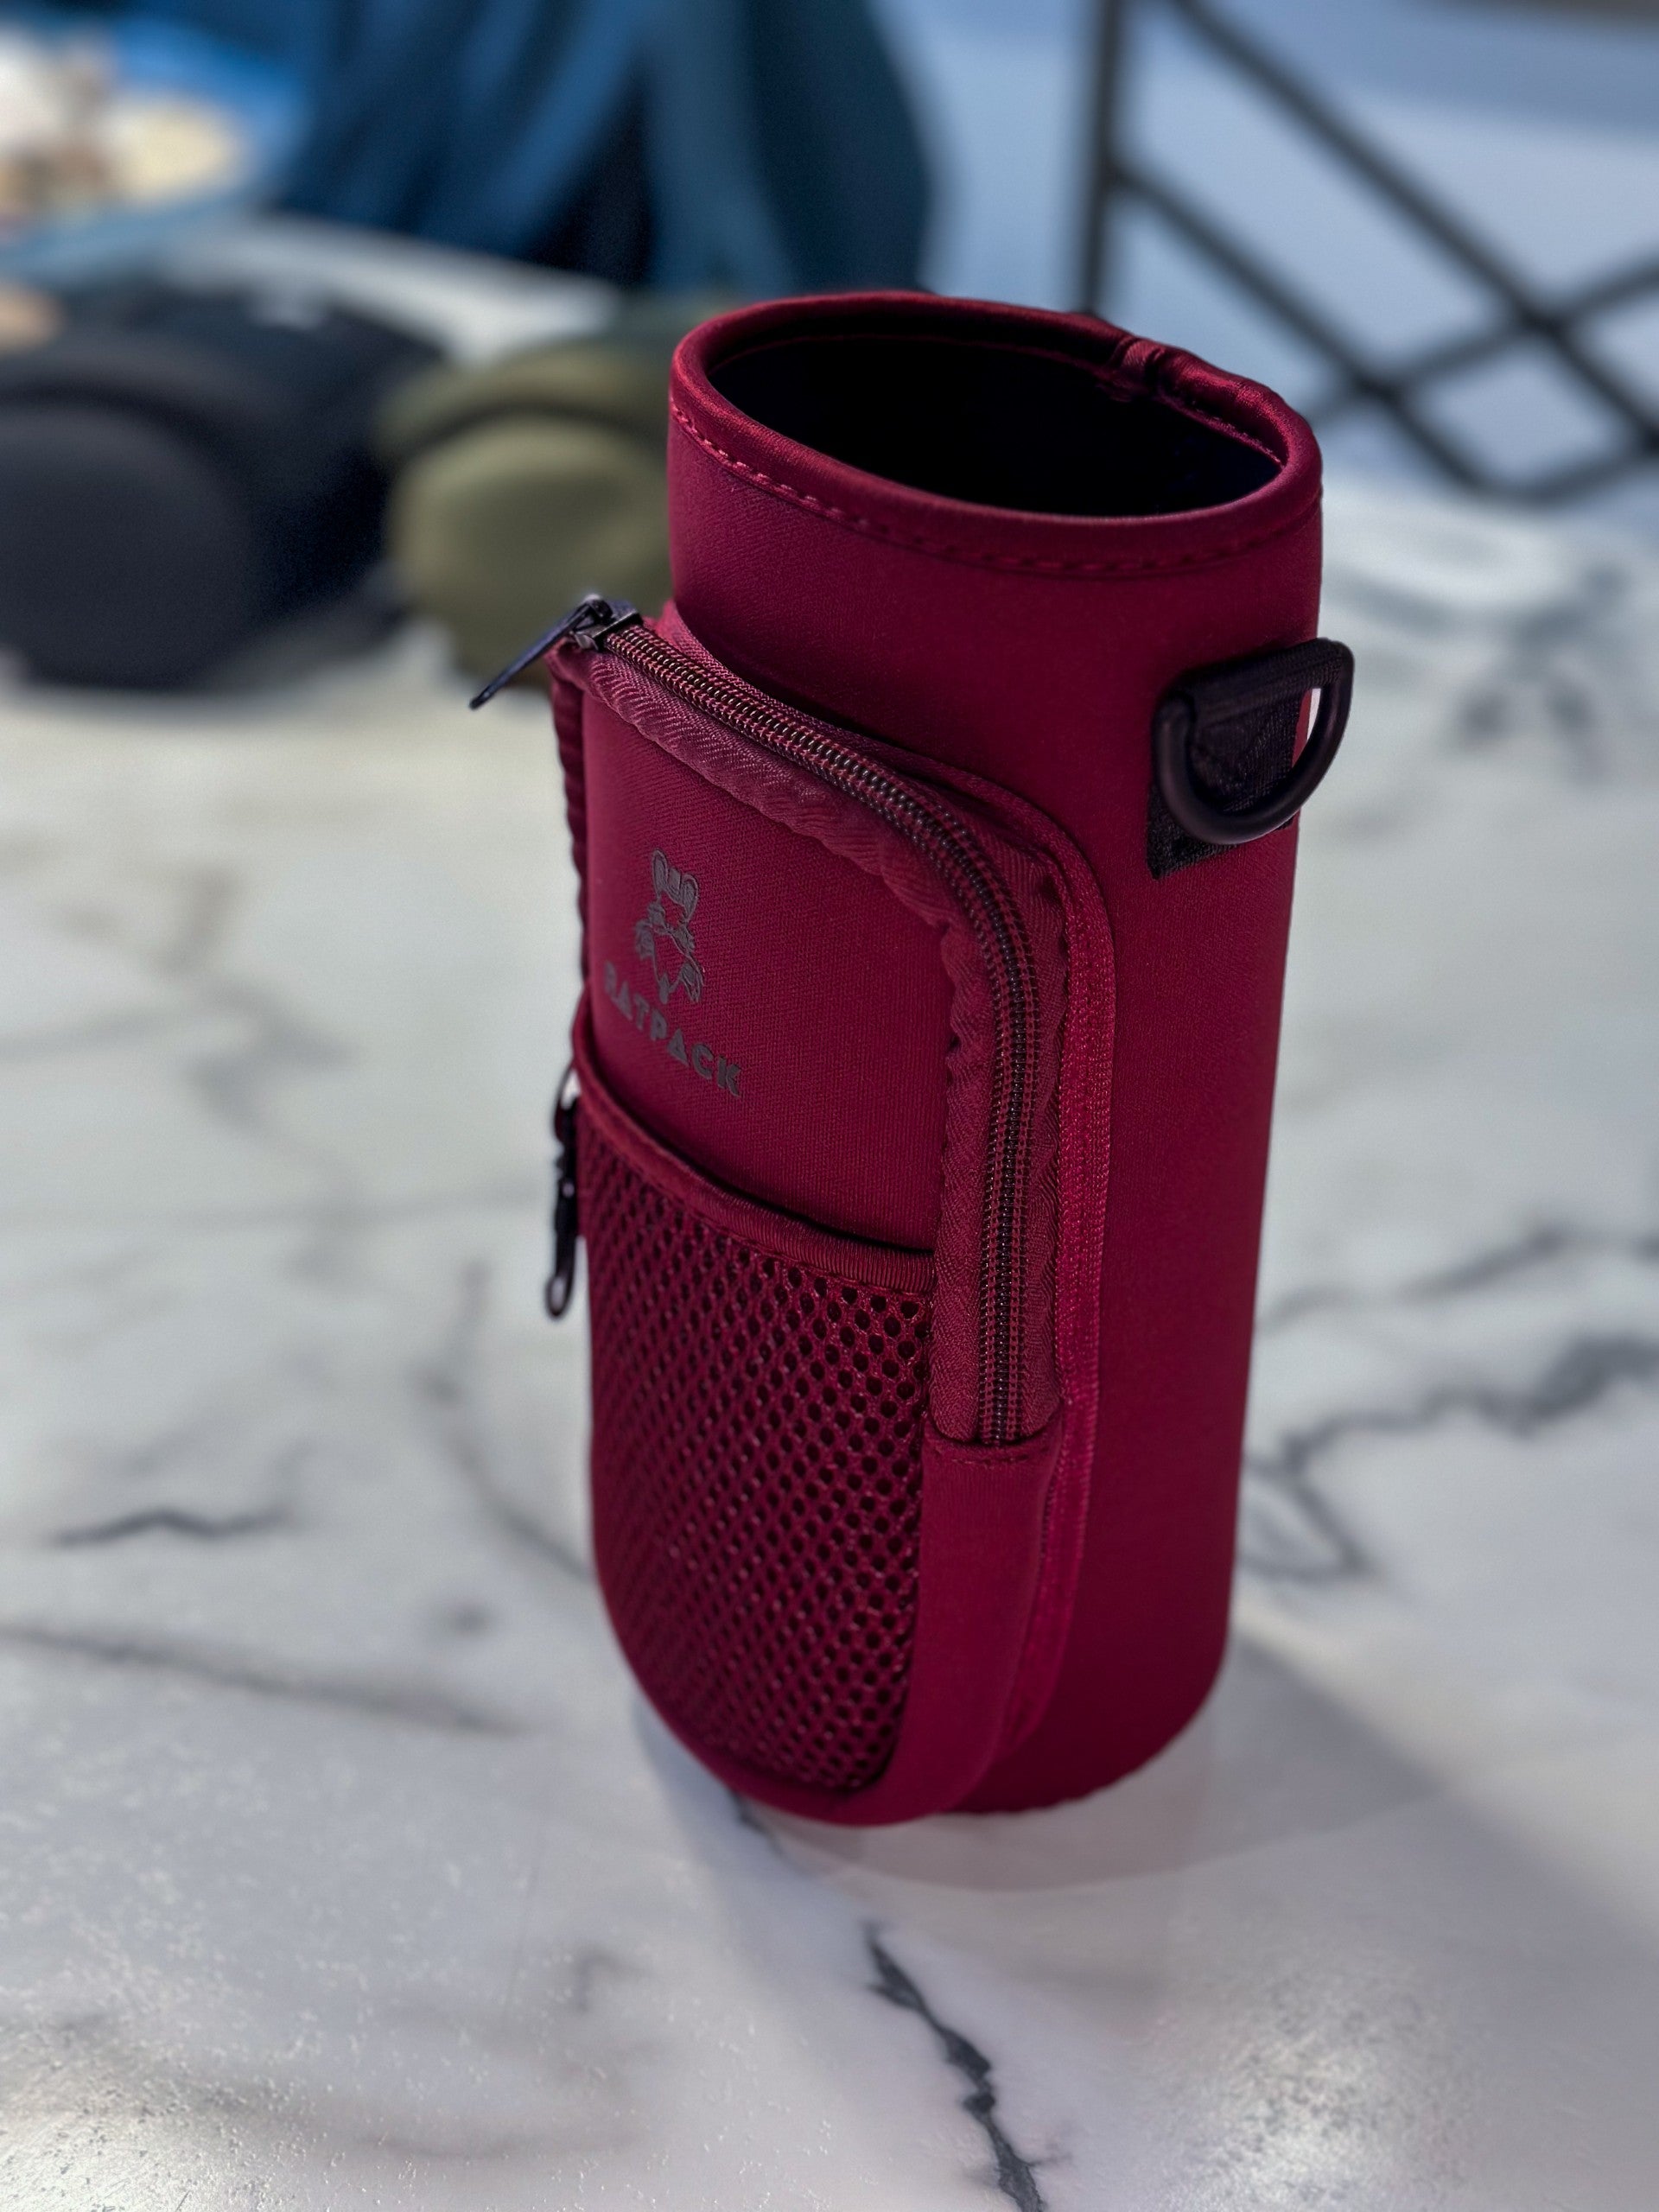 40 ounce/ 1.3 Liter water bottle sleeve insulated cross body carrier with pockets for phone and essentials, built in key chain burgundy